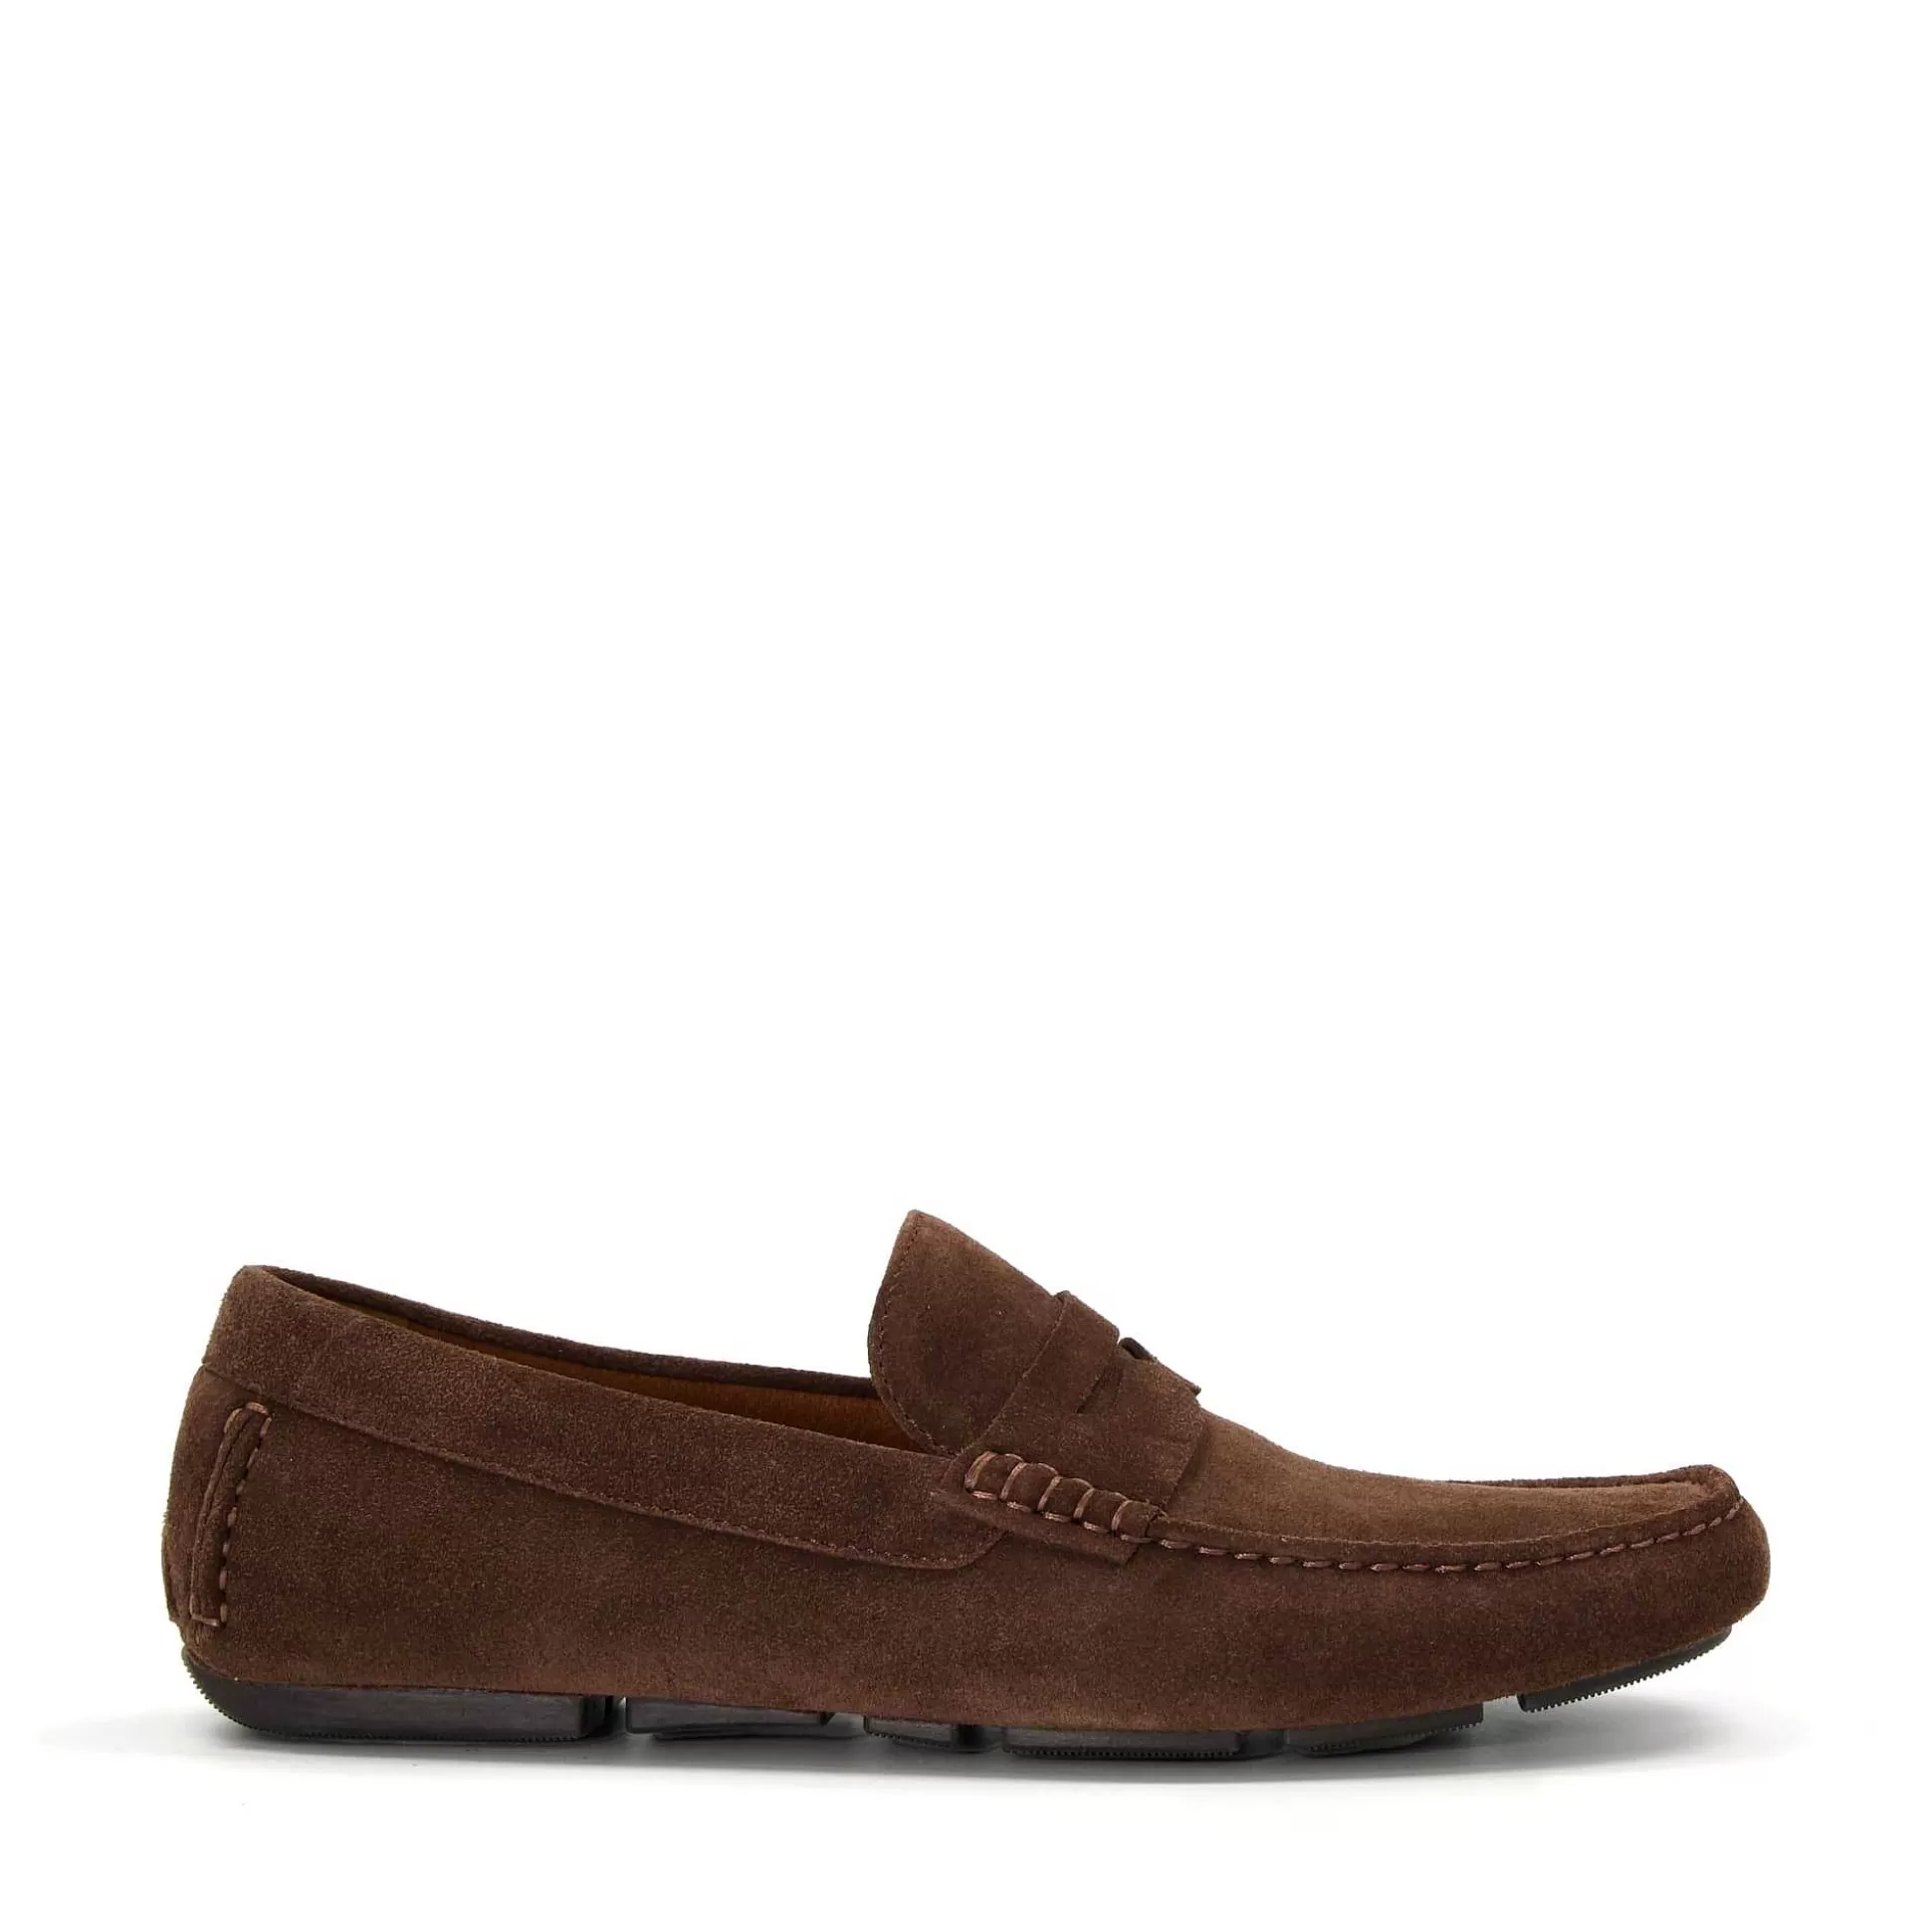 Dune London BRADLAY - BROWN-Men Casual Shoes | Loafers